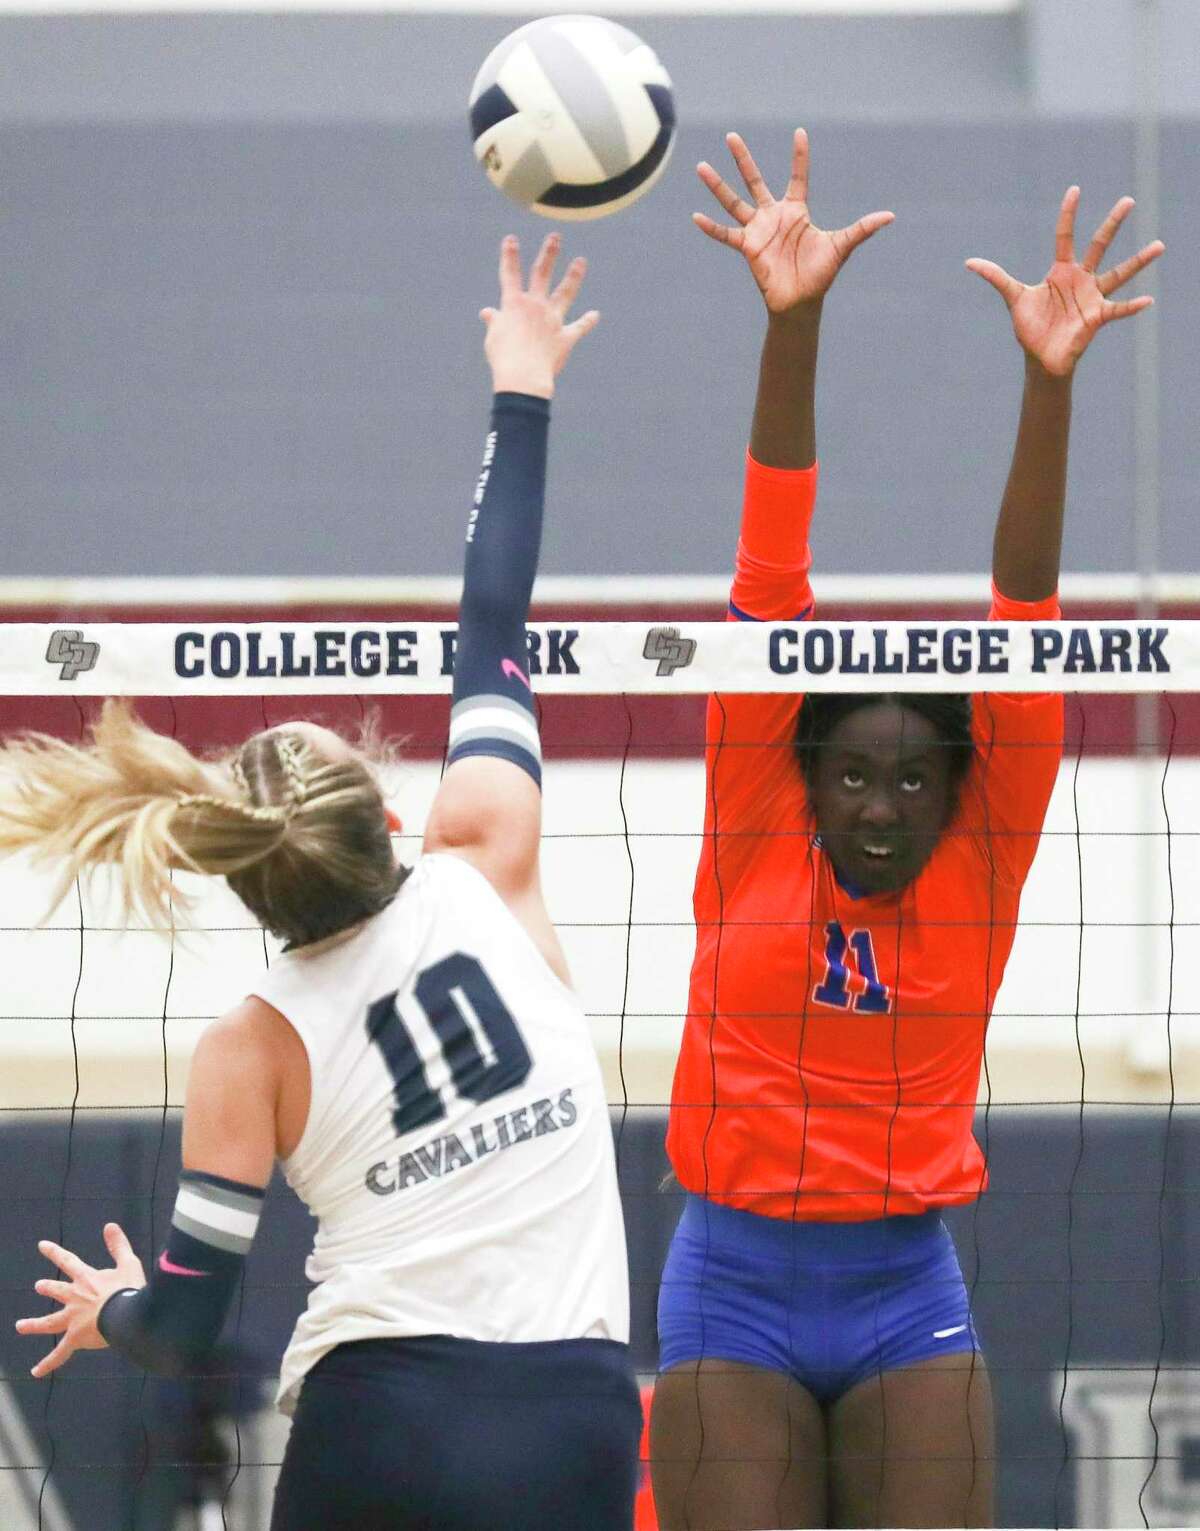 Grand Oaks' Jaela Auguste (11) pressures a shot by College Park's Cassidy Copeland (10) in the first set of a District 13-6A high school volleyball match at College Park High School, Tuesday, Aug. 23, 2022, in The Woodlands.